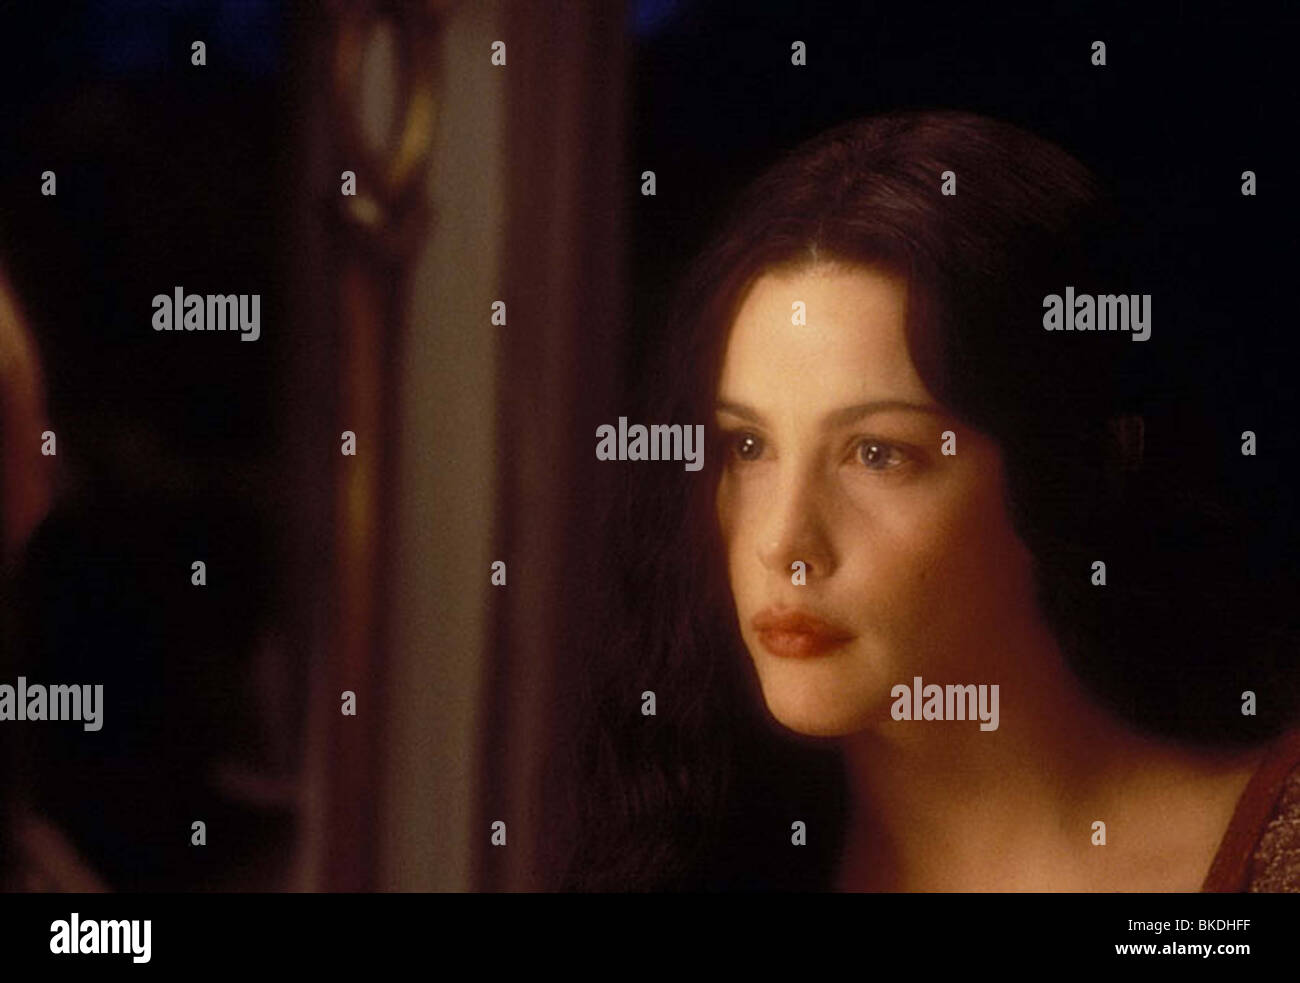 THE LORD OF THE RINGS: THE RETURN OF THE KING (2003) LIV TYLER, ARWEN ROTK 001-015 Stock Photo